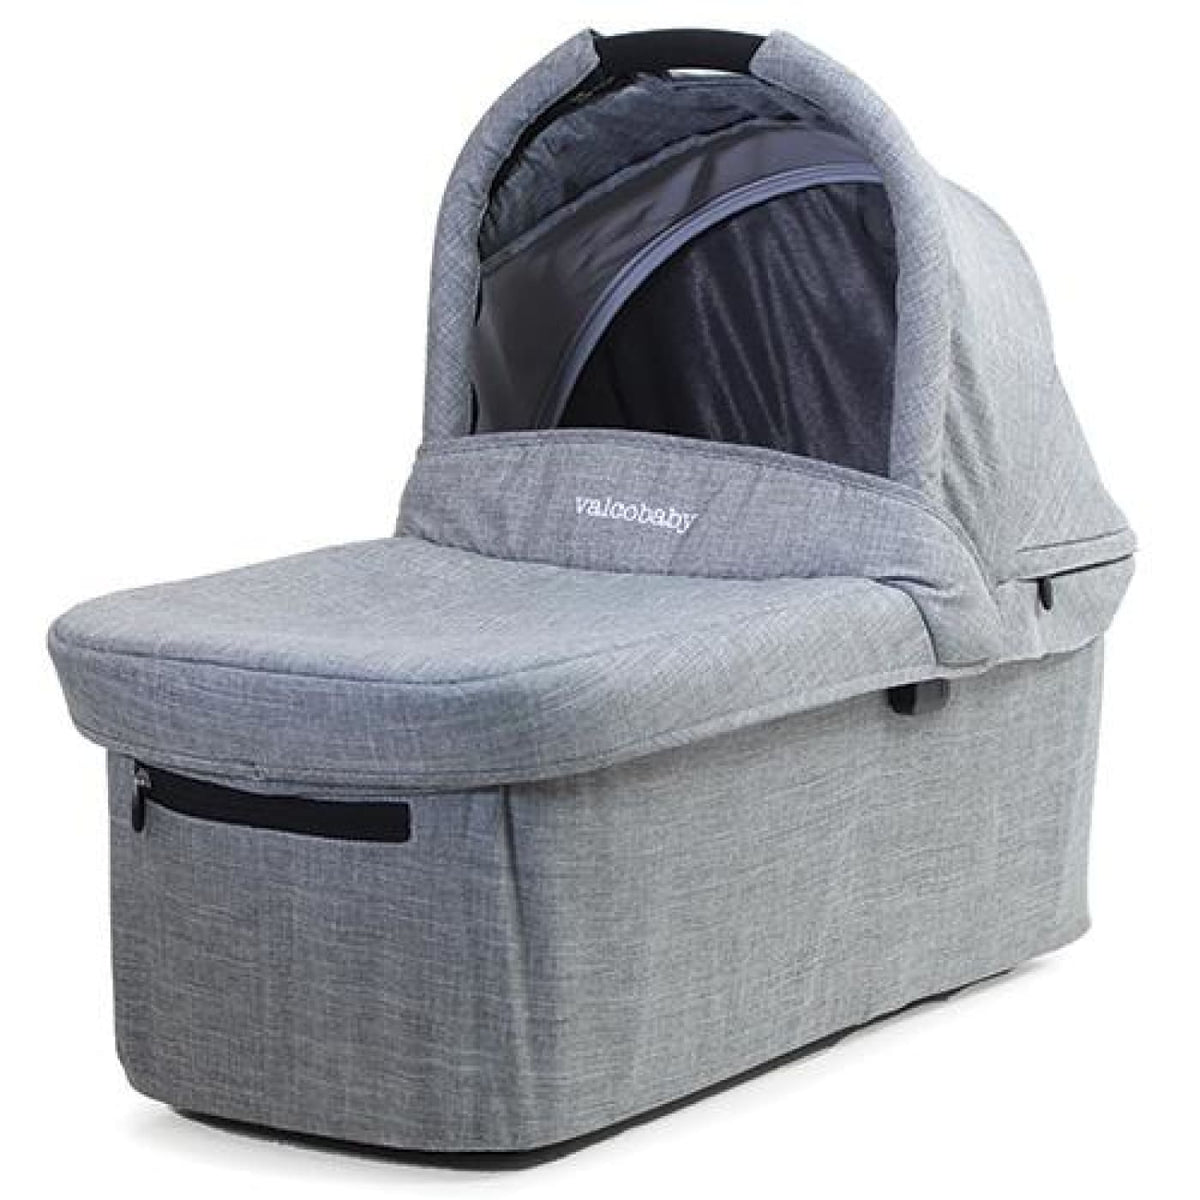 Valco Baby Bassinet for Snap Duo Trend (Includes Adaptor) - Grey Marle - PRAMS &amp; STROLLERS - BASS/CARRY COTS/STANDS